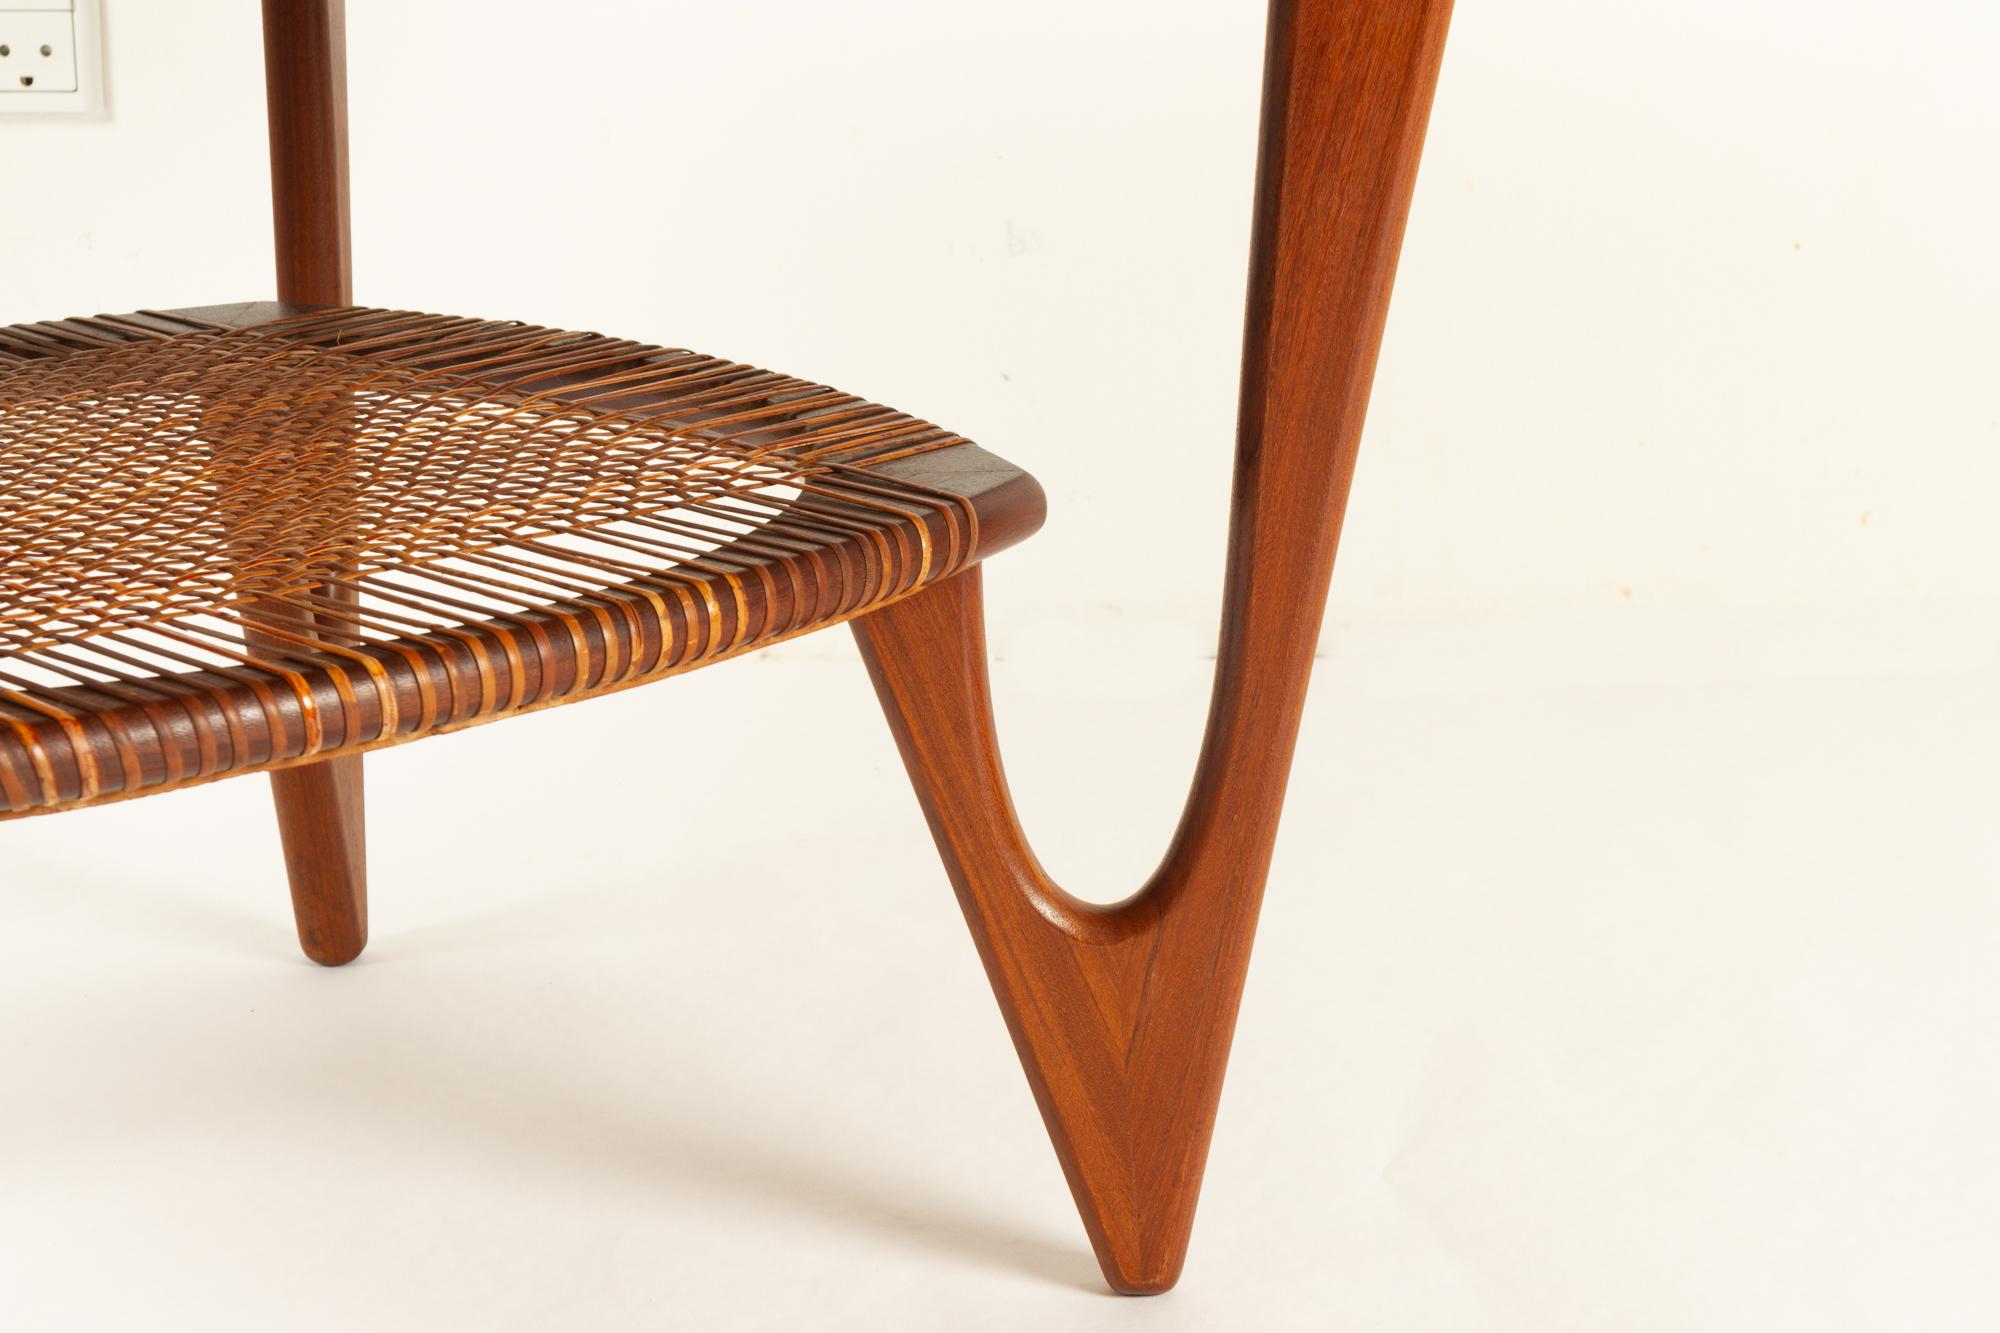 Mid-20th Century Vintage Danish Rosewood Coffee Table by Kurt Østervig for Jason Møbler, 1950s